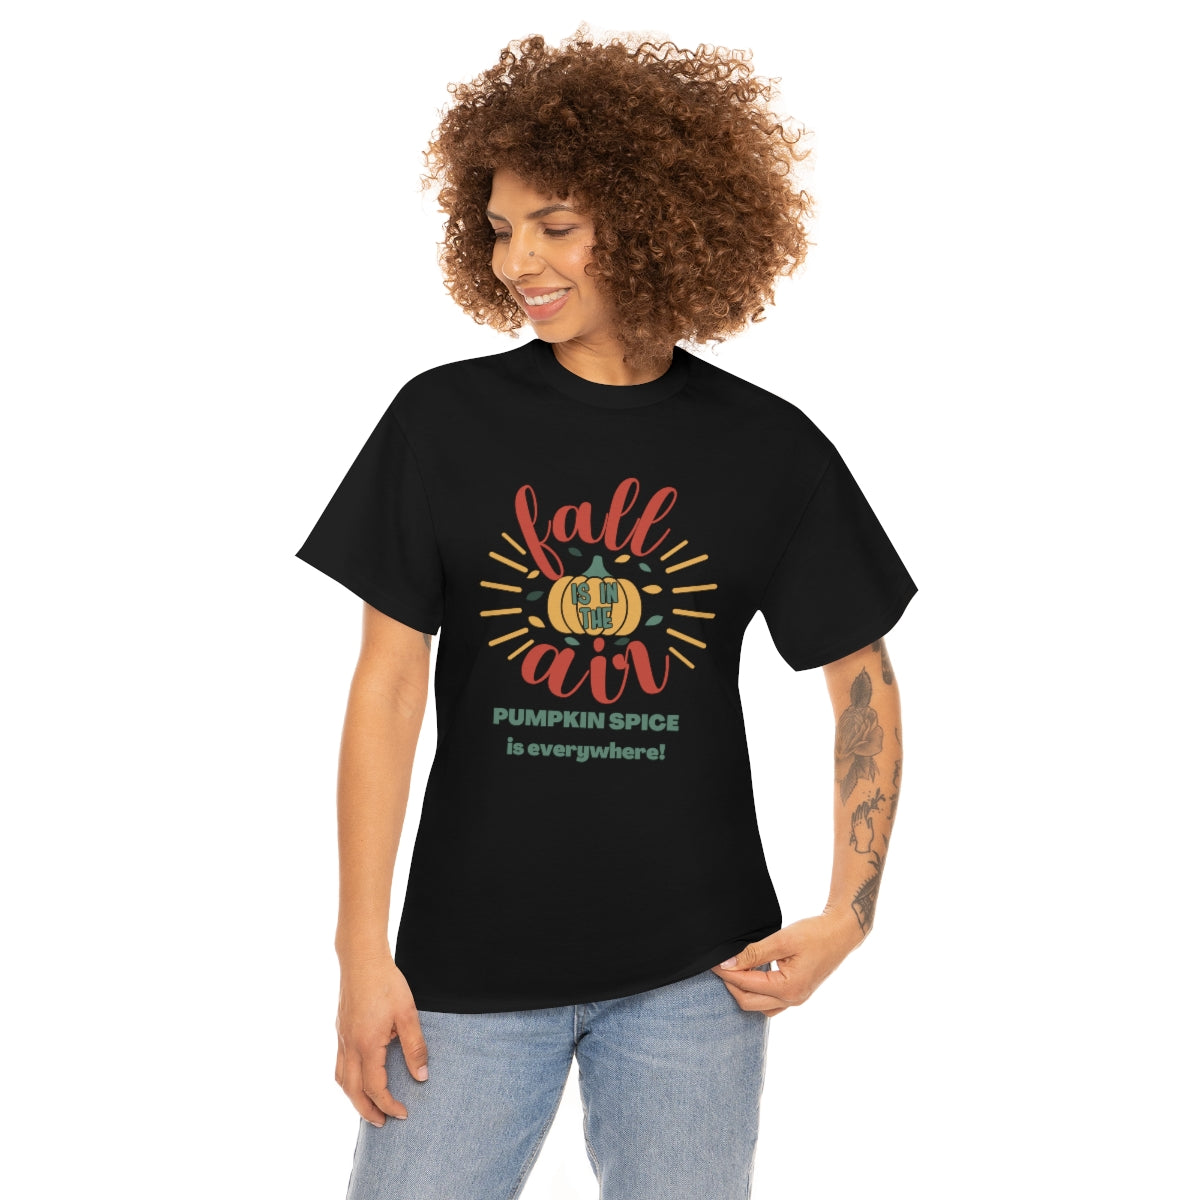 Fall is in the Air and Pumpkin Spice is Everywhere Tee S-5XL